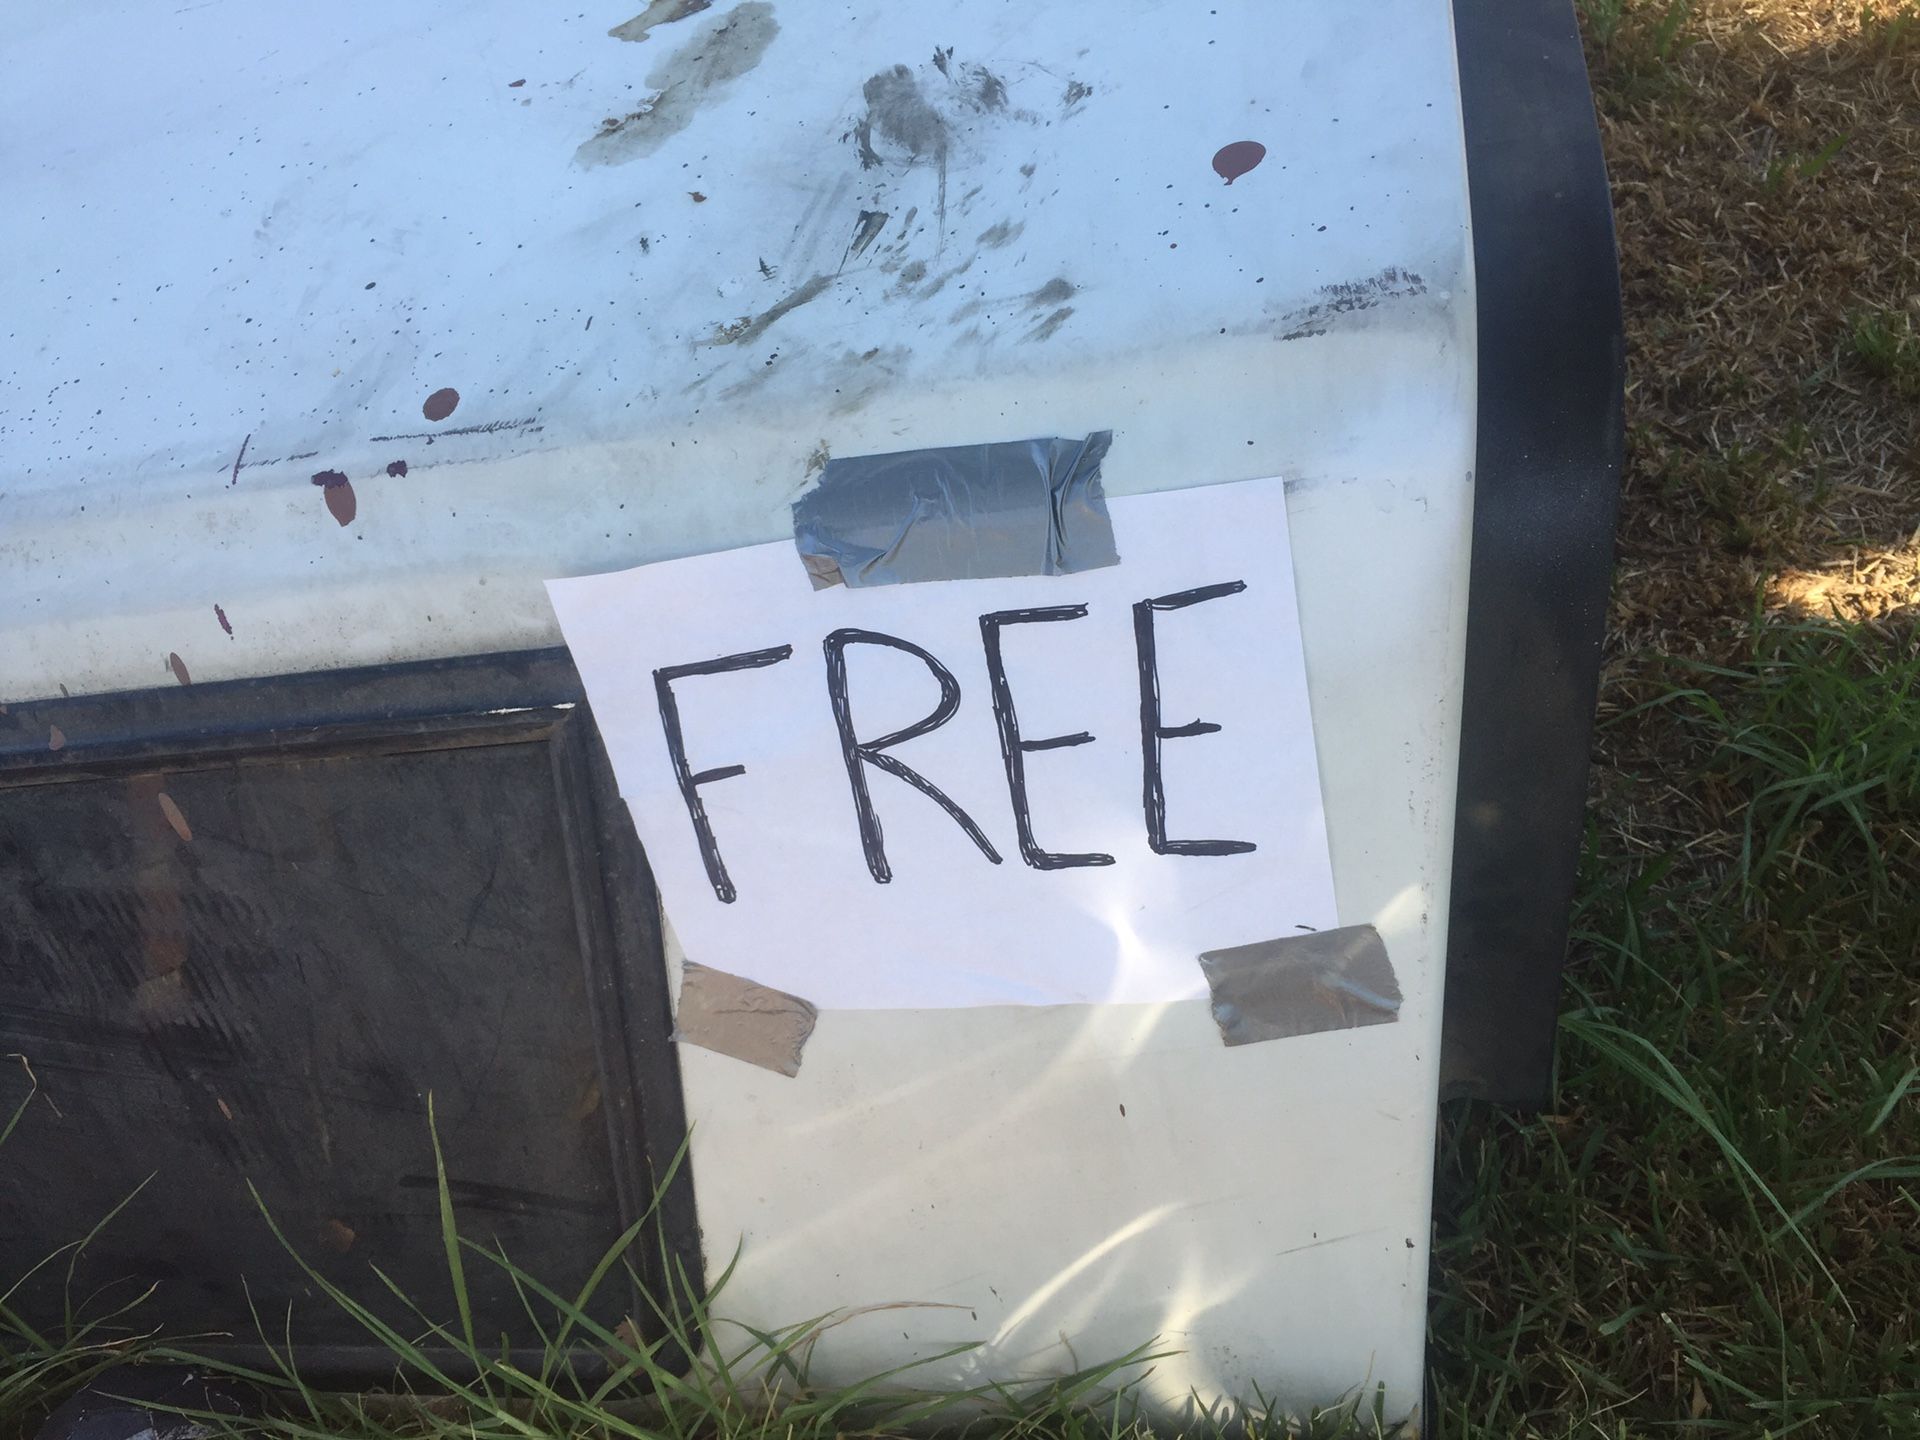 FREE Long bed camper shell. IN RANCHO CUCAMONGA